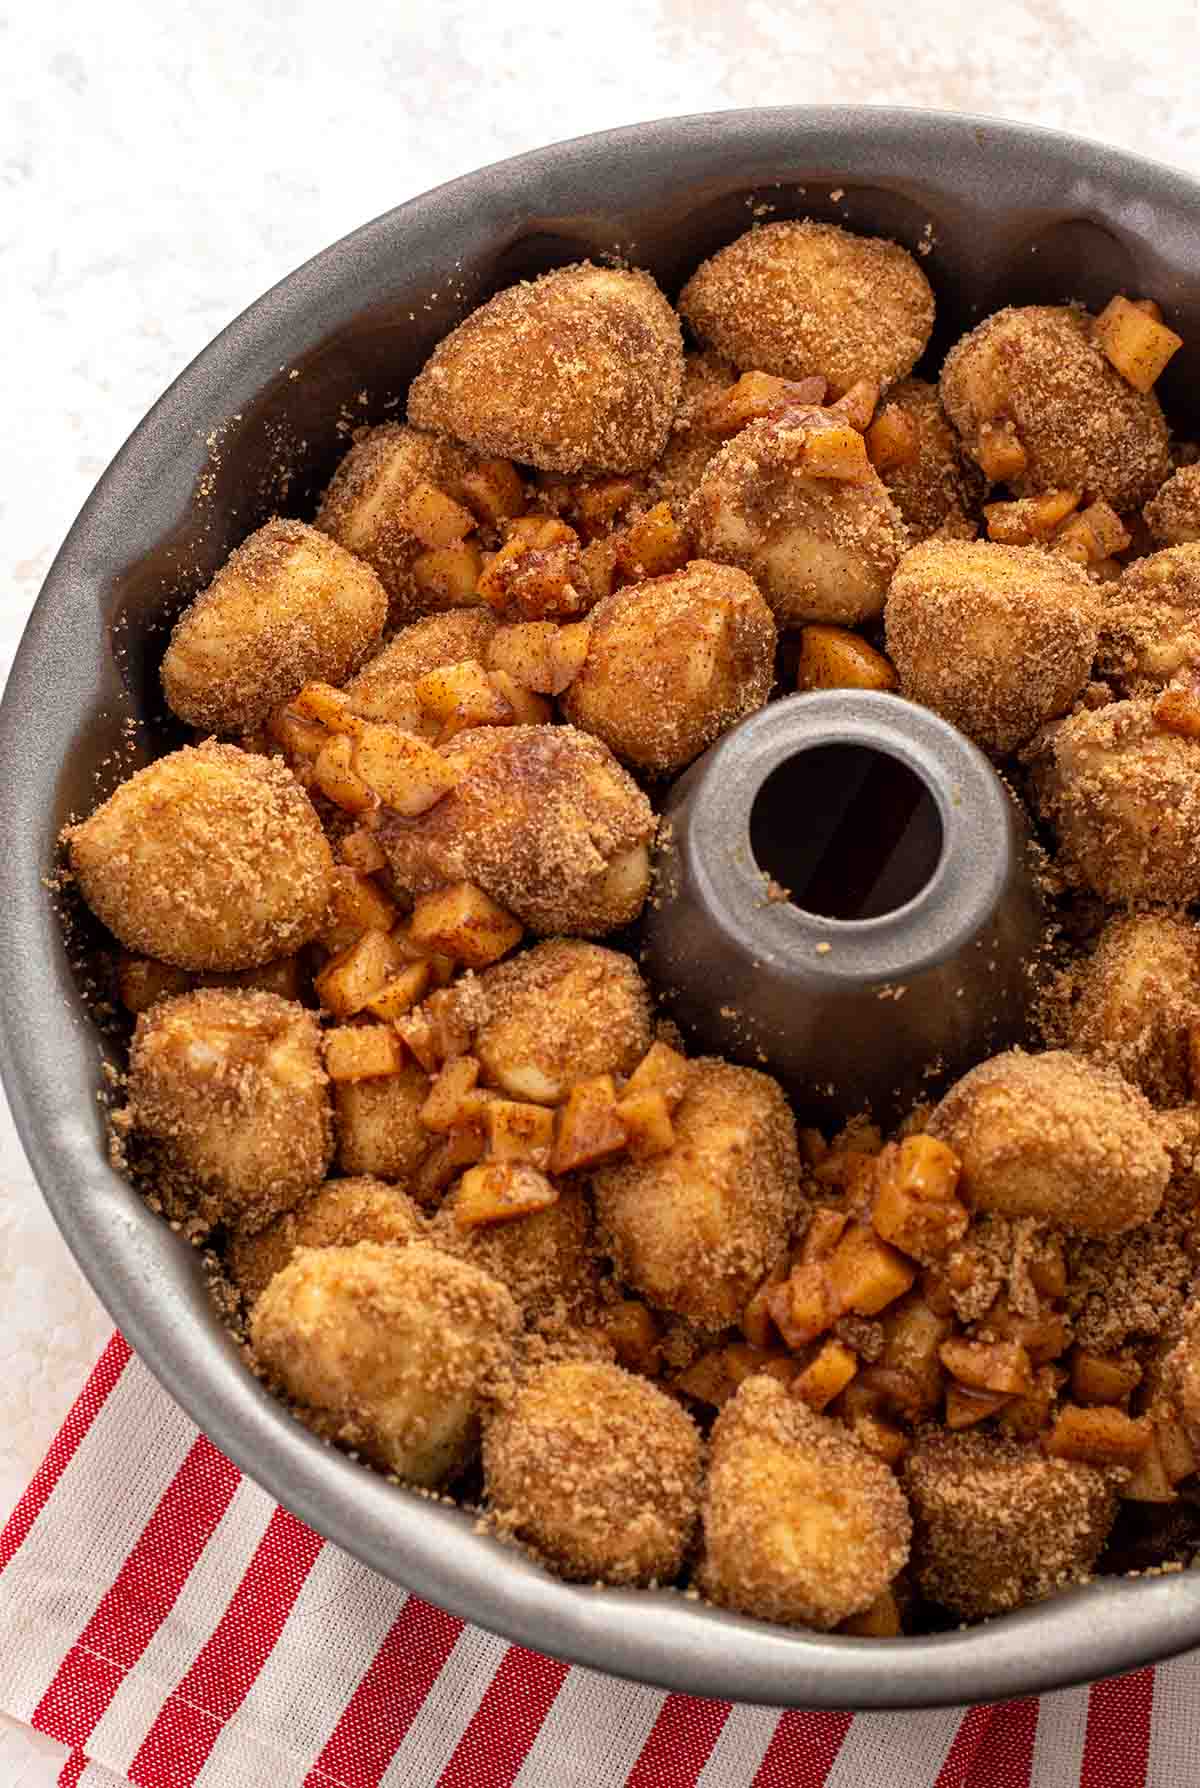 Bundt pan filled with cinnamon sugar coated dinner rolls and fried apples.